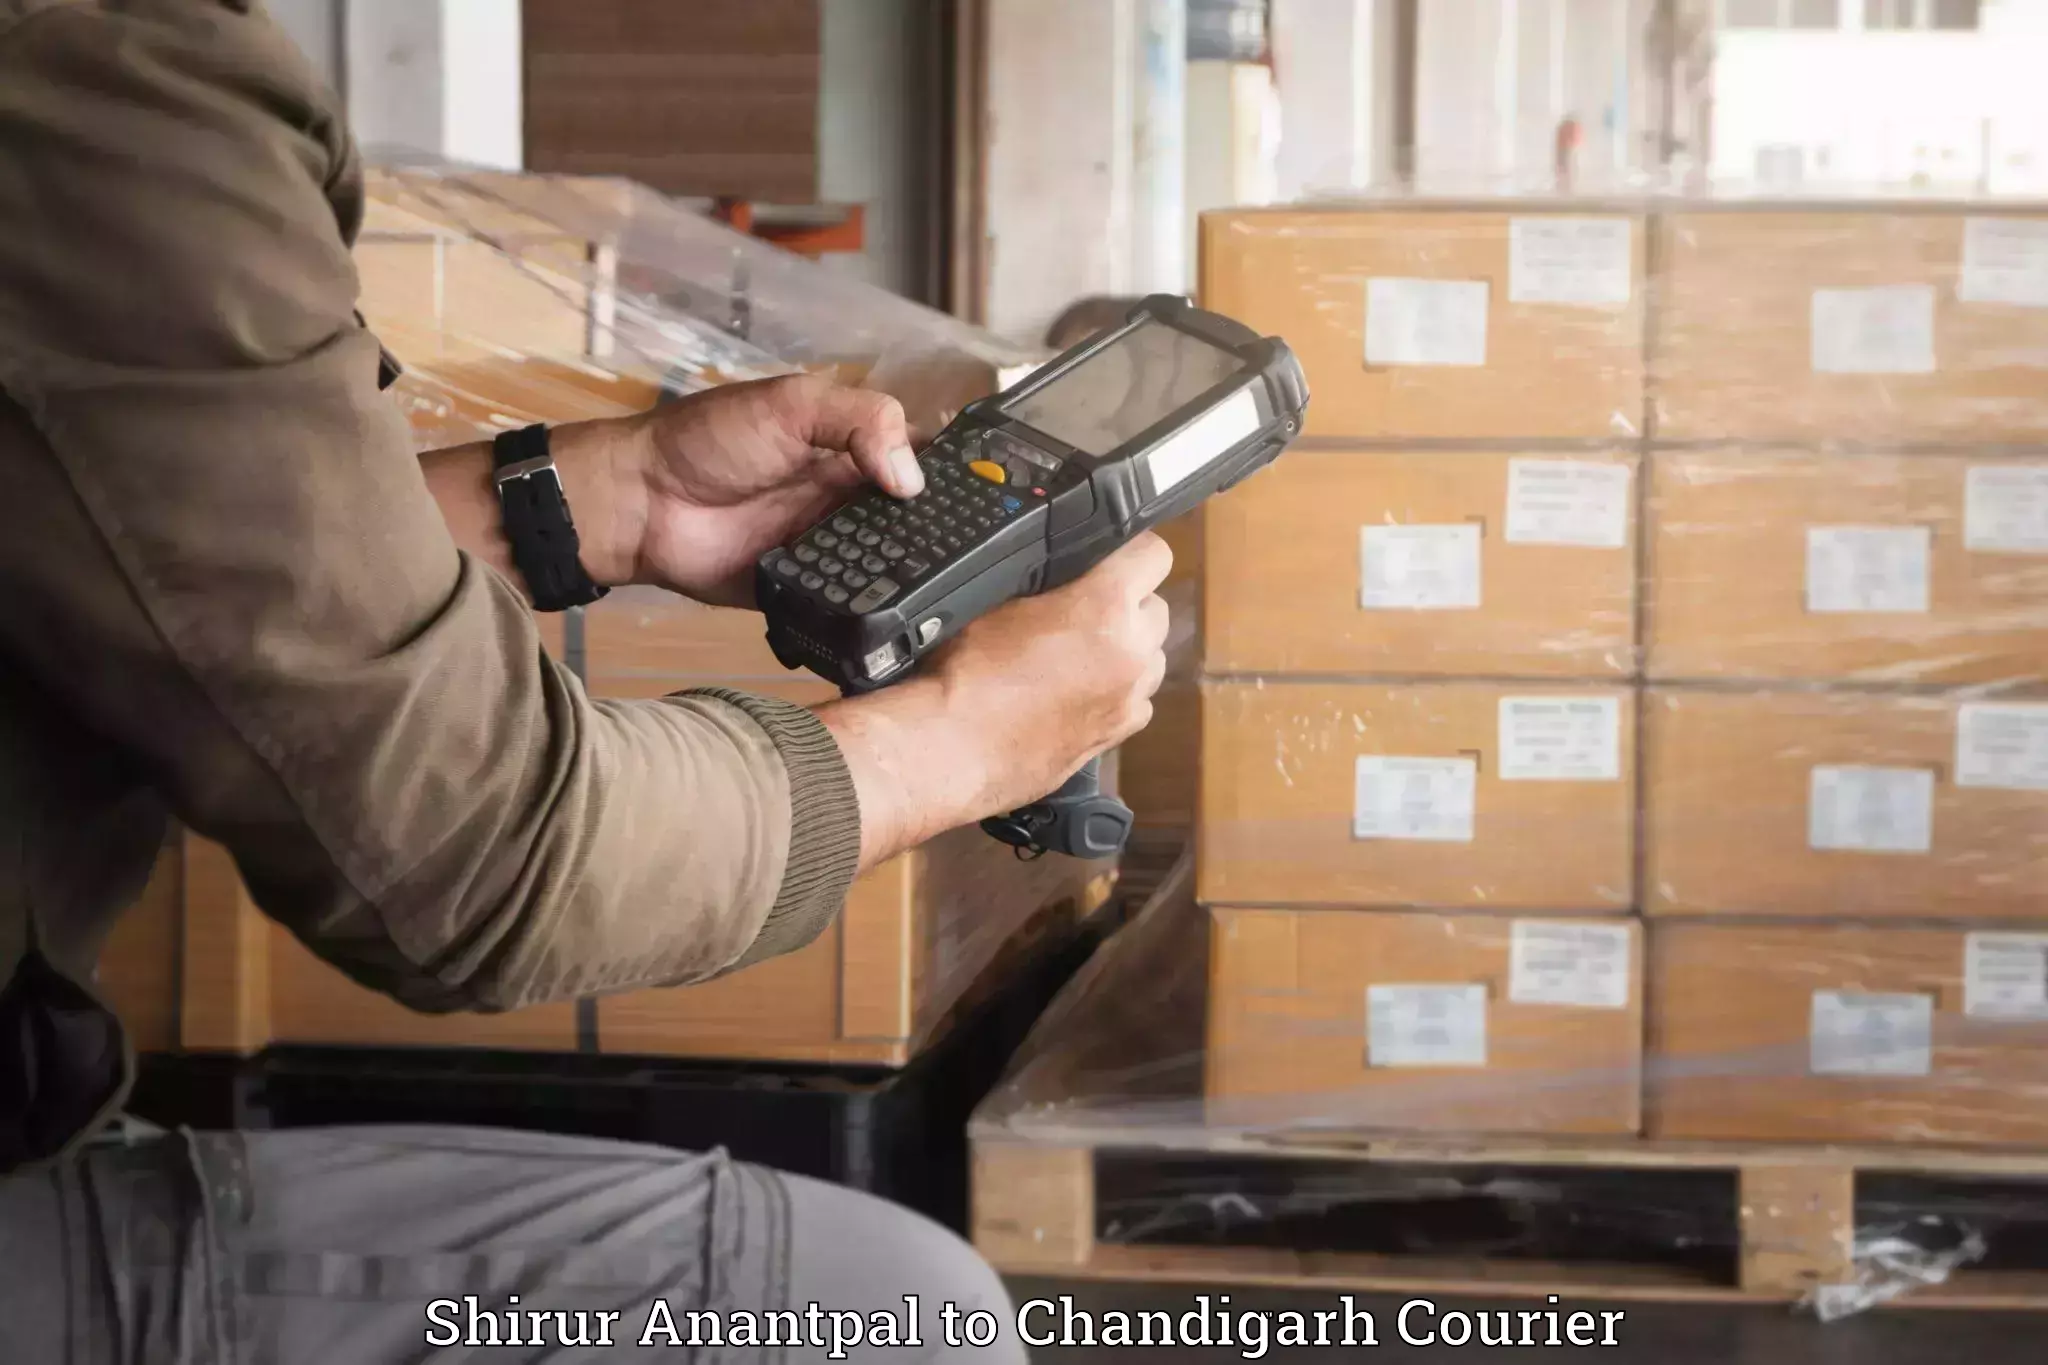 Luggage shipment specialists Shirur Anantpal to Chandigarh